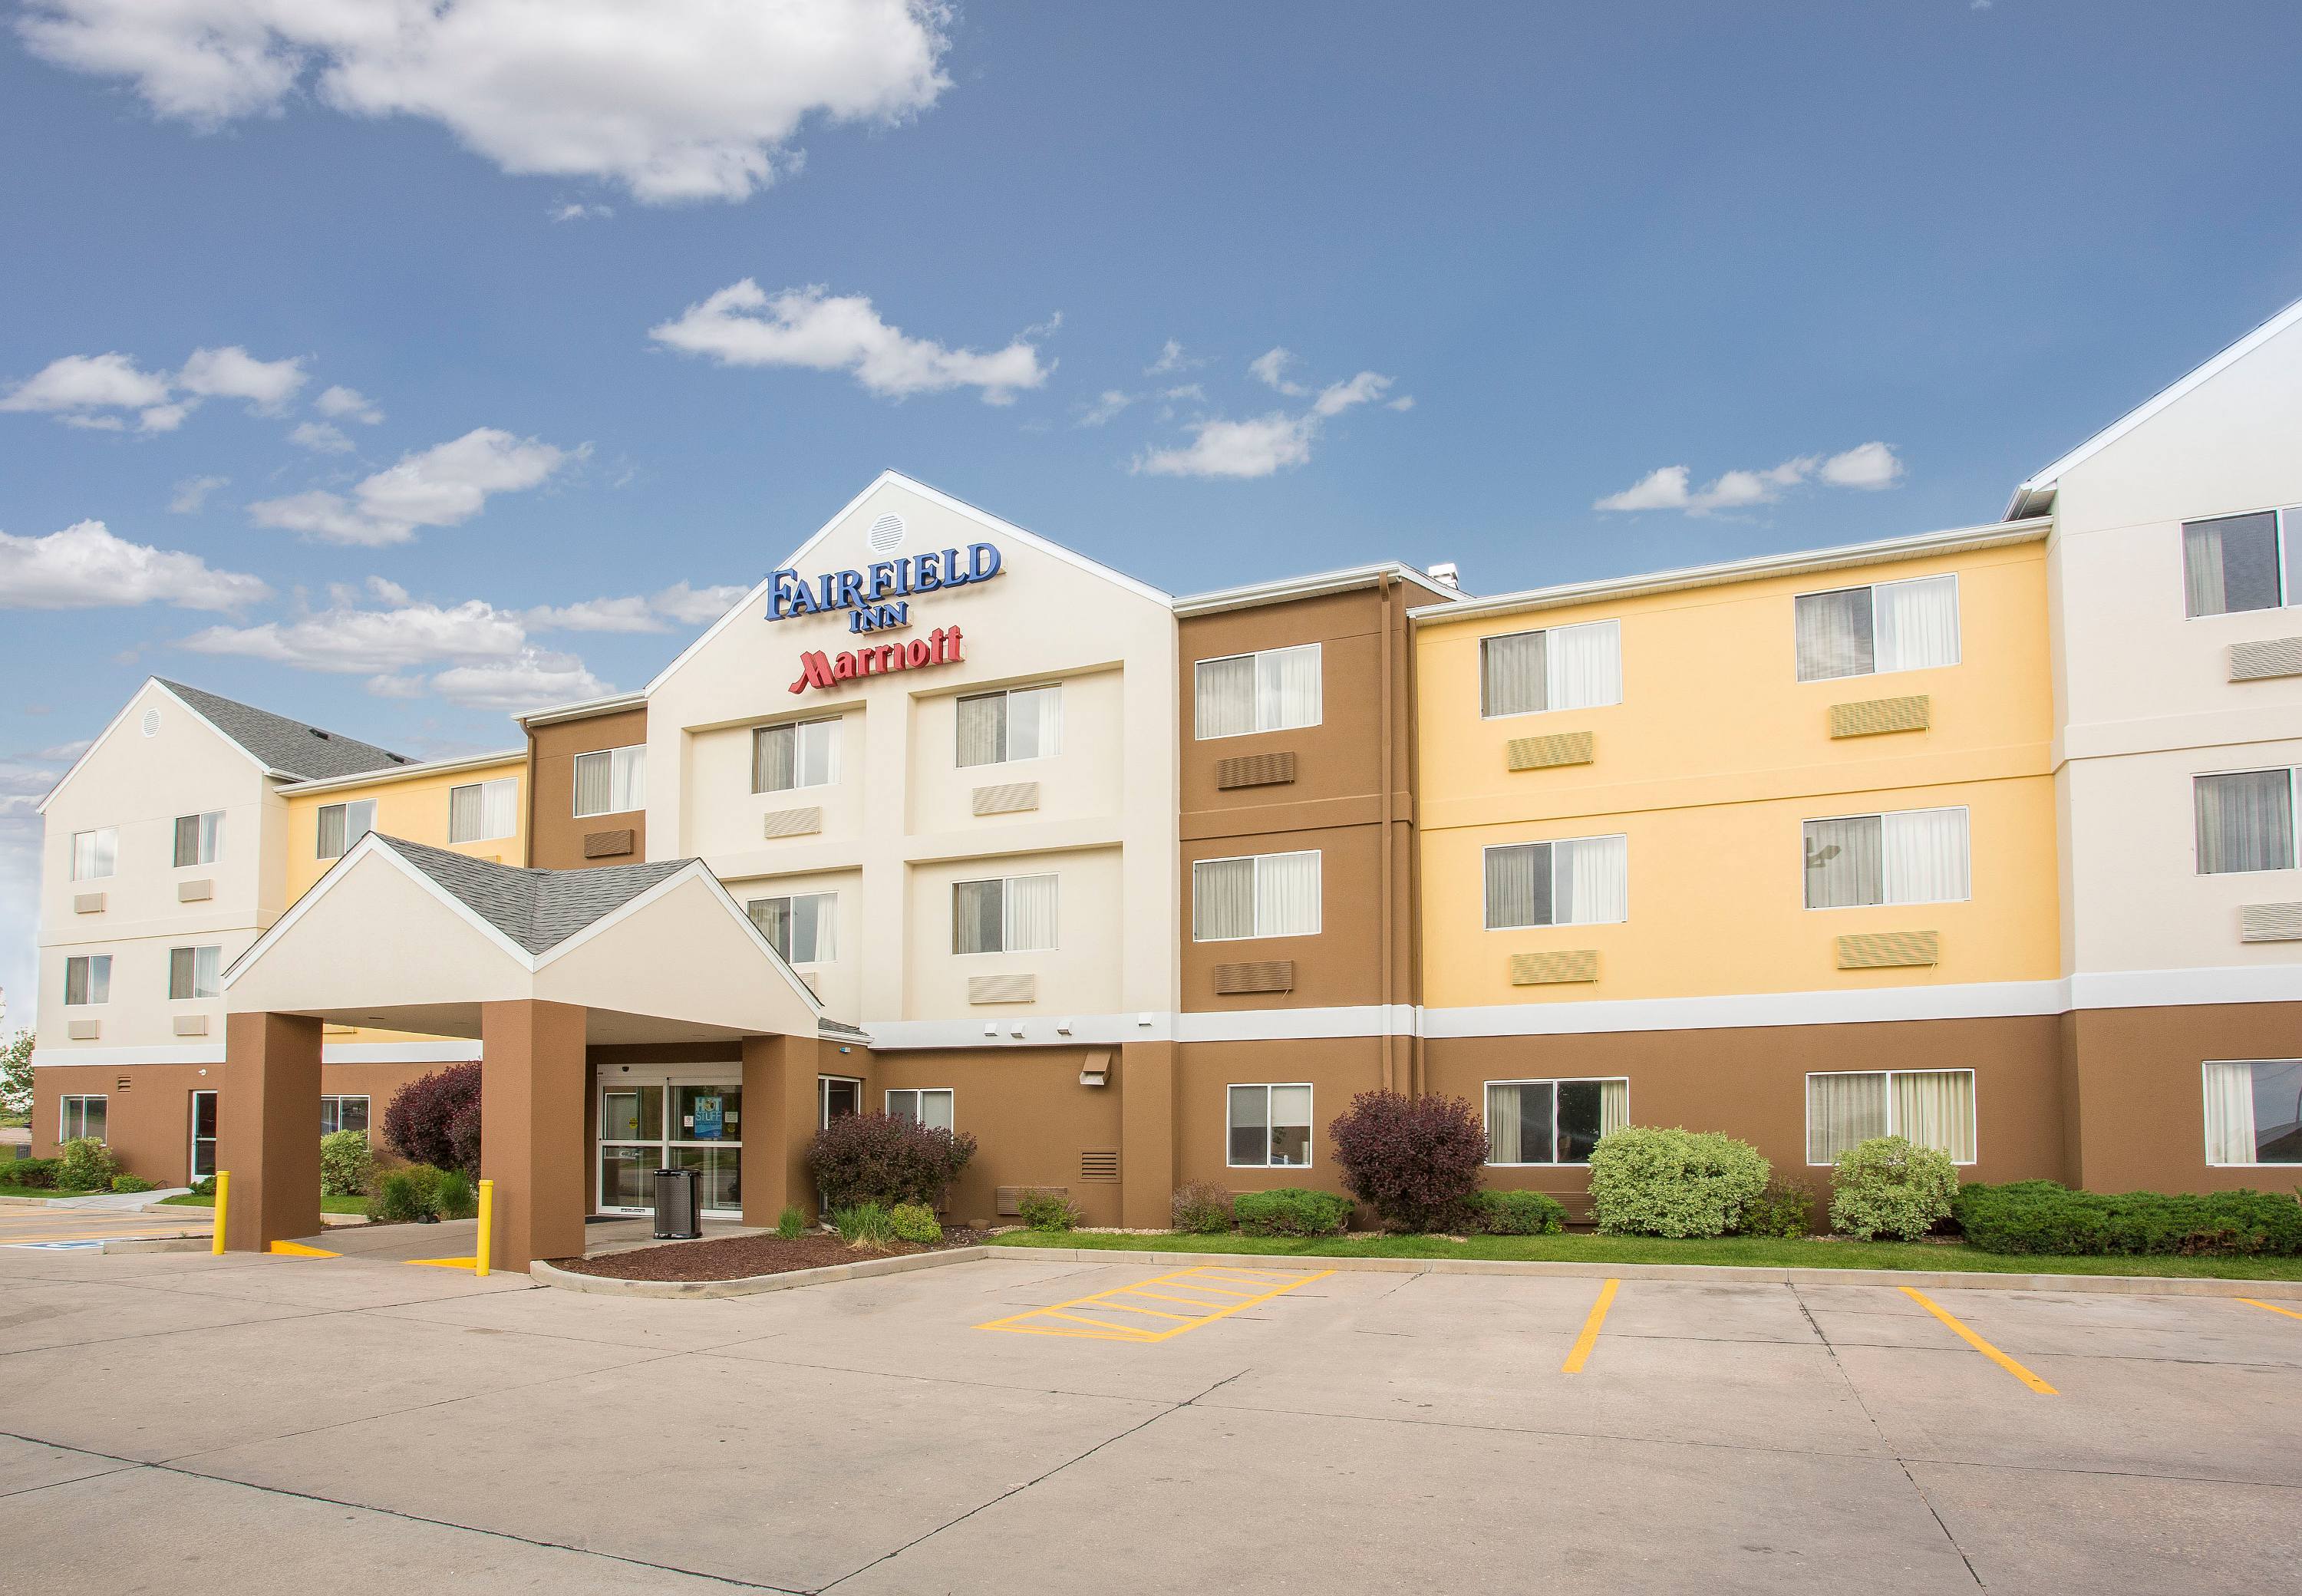 Photo of Fairfield Inn & Suites by Marriott Greeley, Greeley, CO